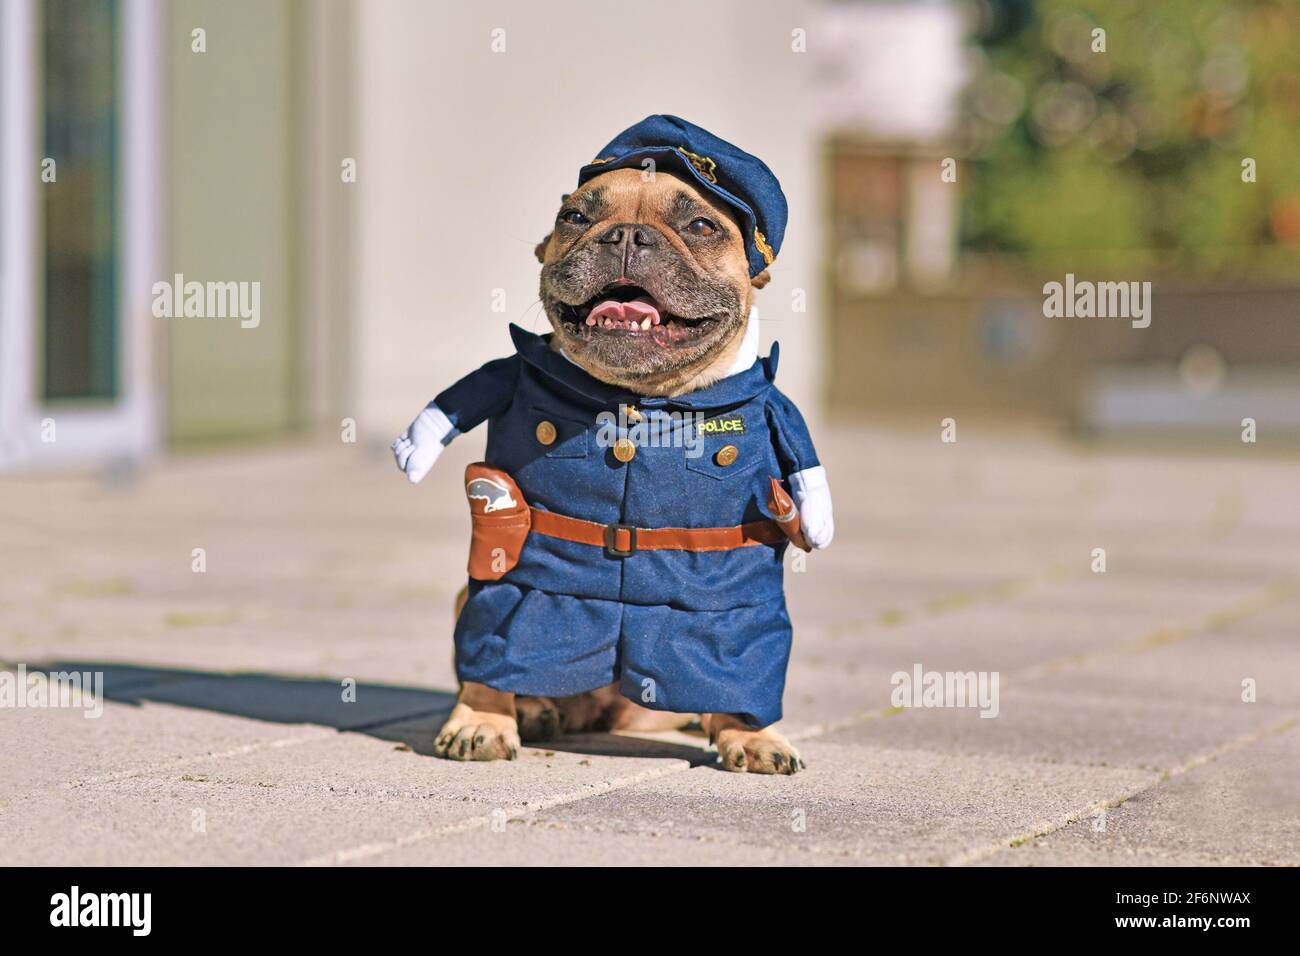 Funny French Bulldog dog wearing funny police officer uniform costume with fake arms Stock Photo